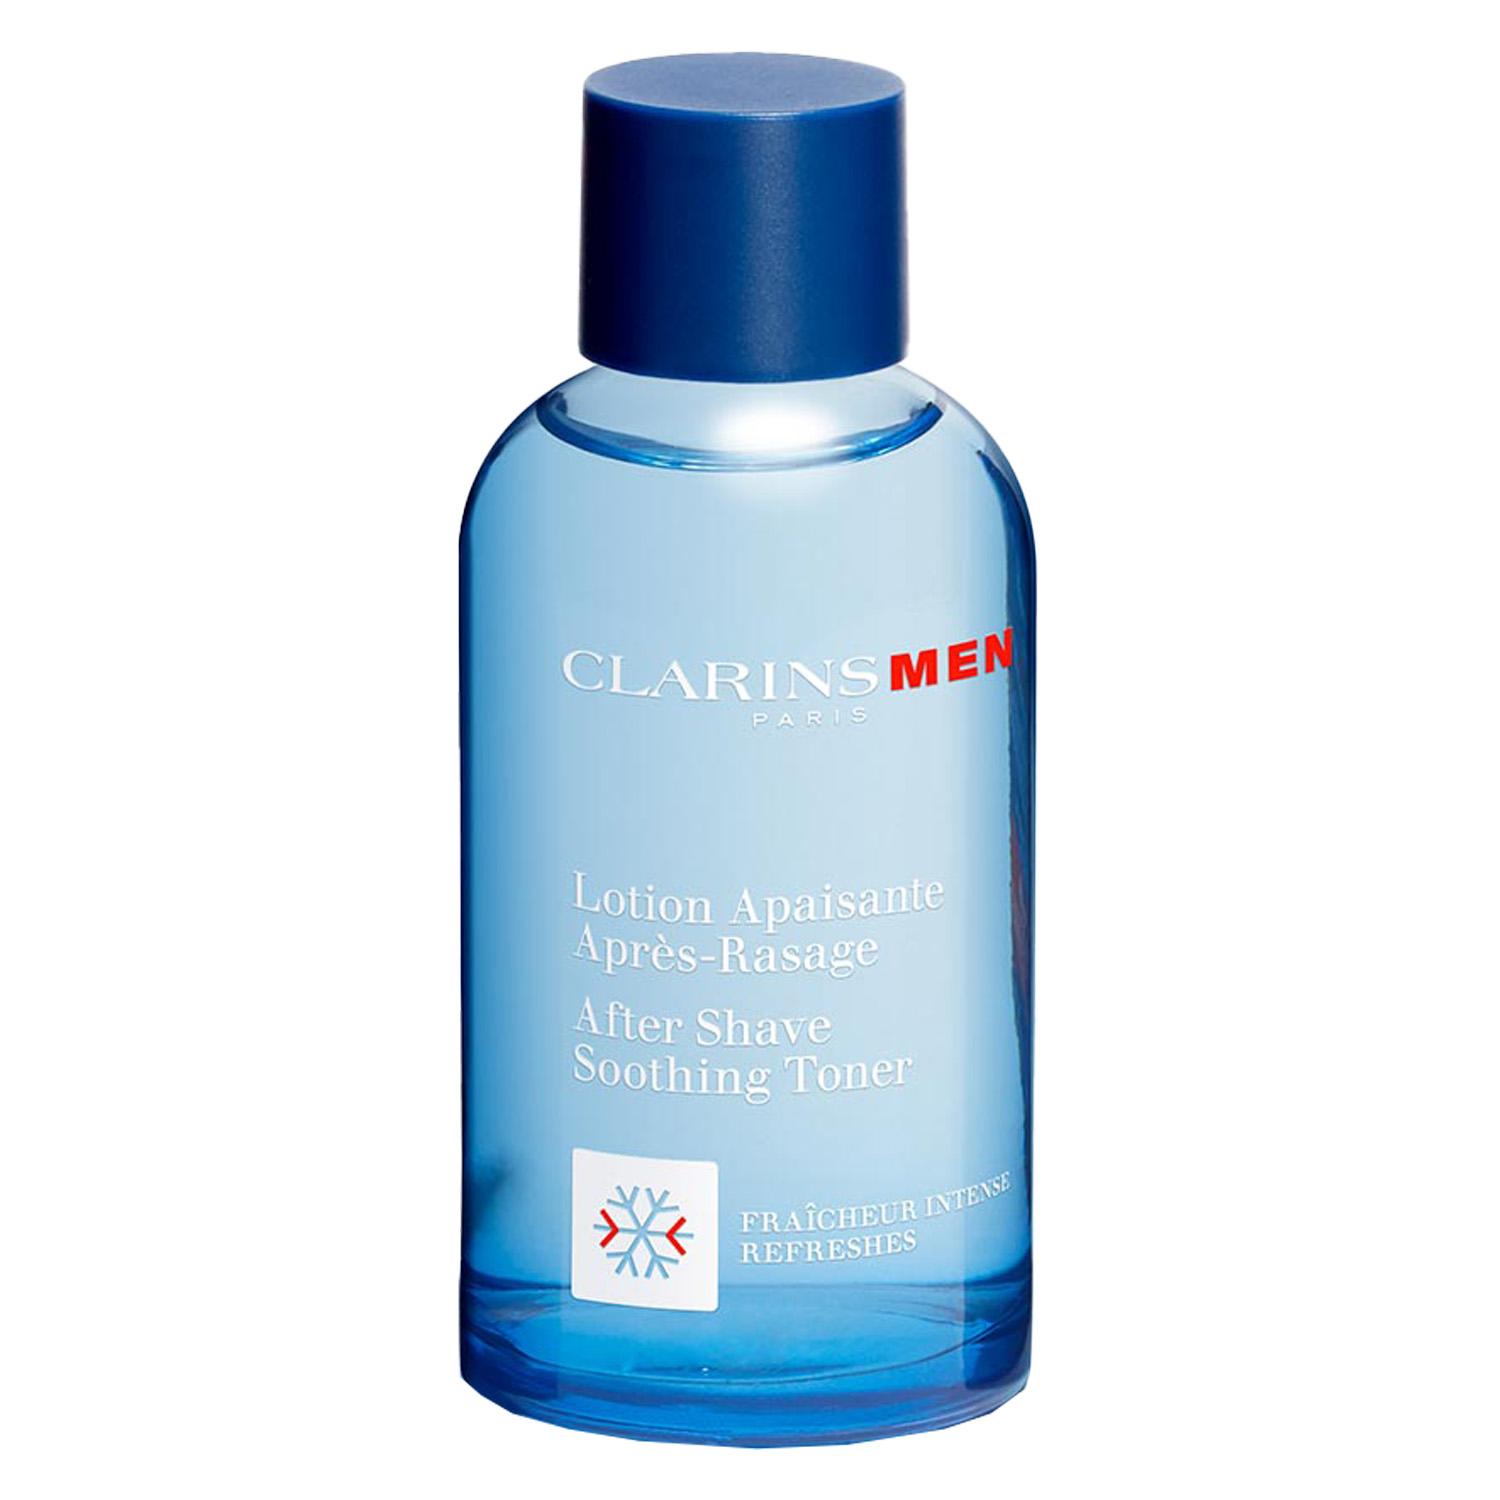 Clarins Men - After Shave Soothing Toner